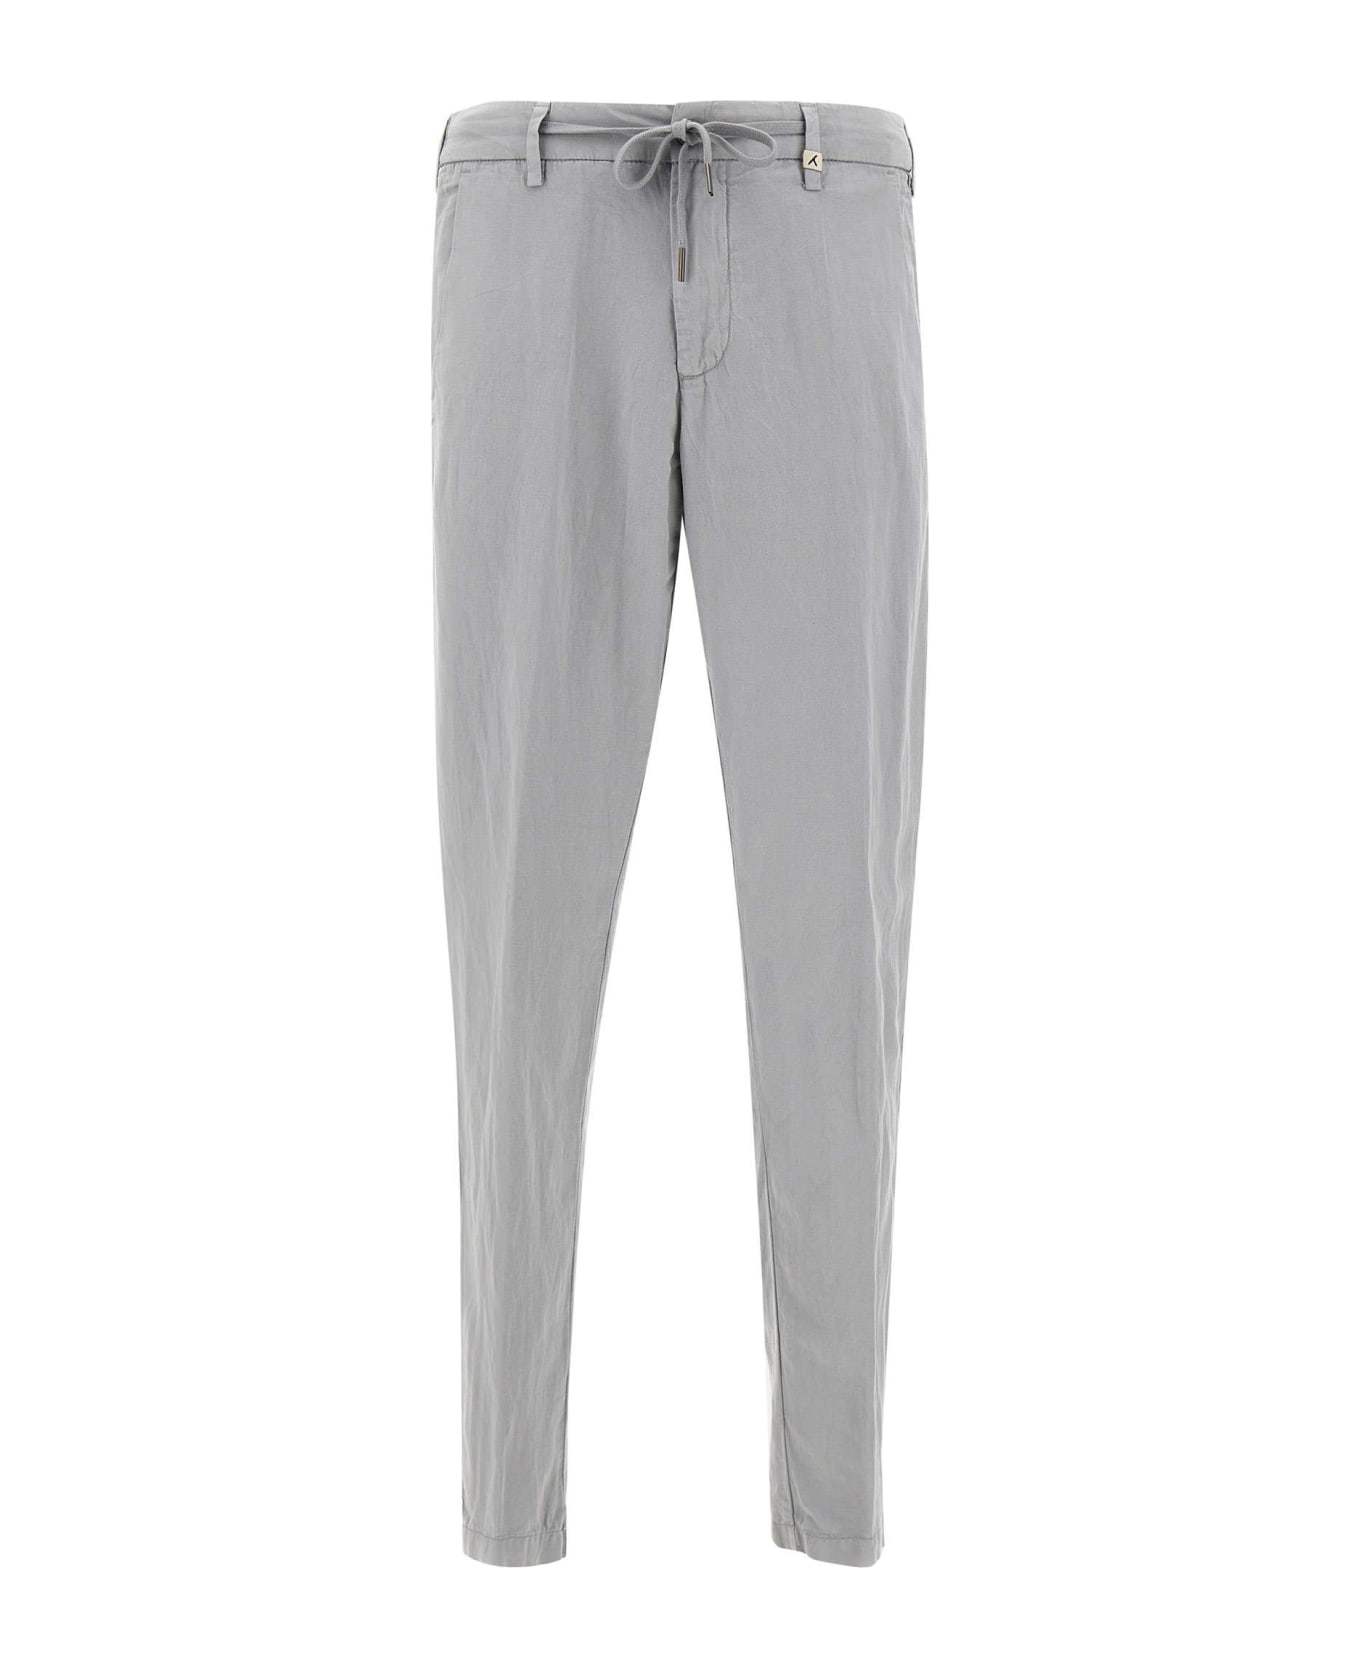 Myths "apollo" Linen And Cotton Trousers - GREY